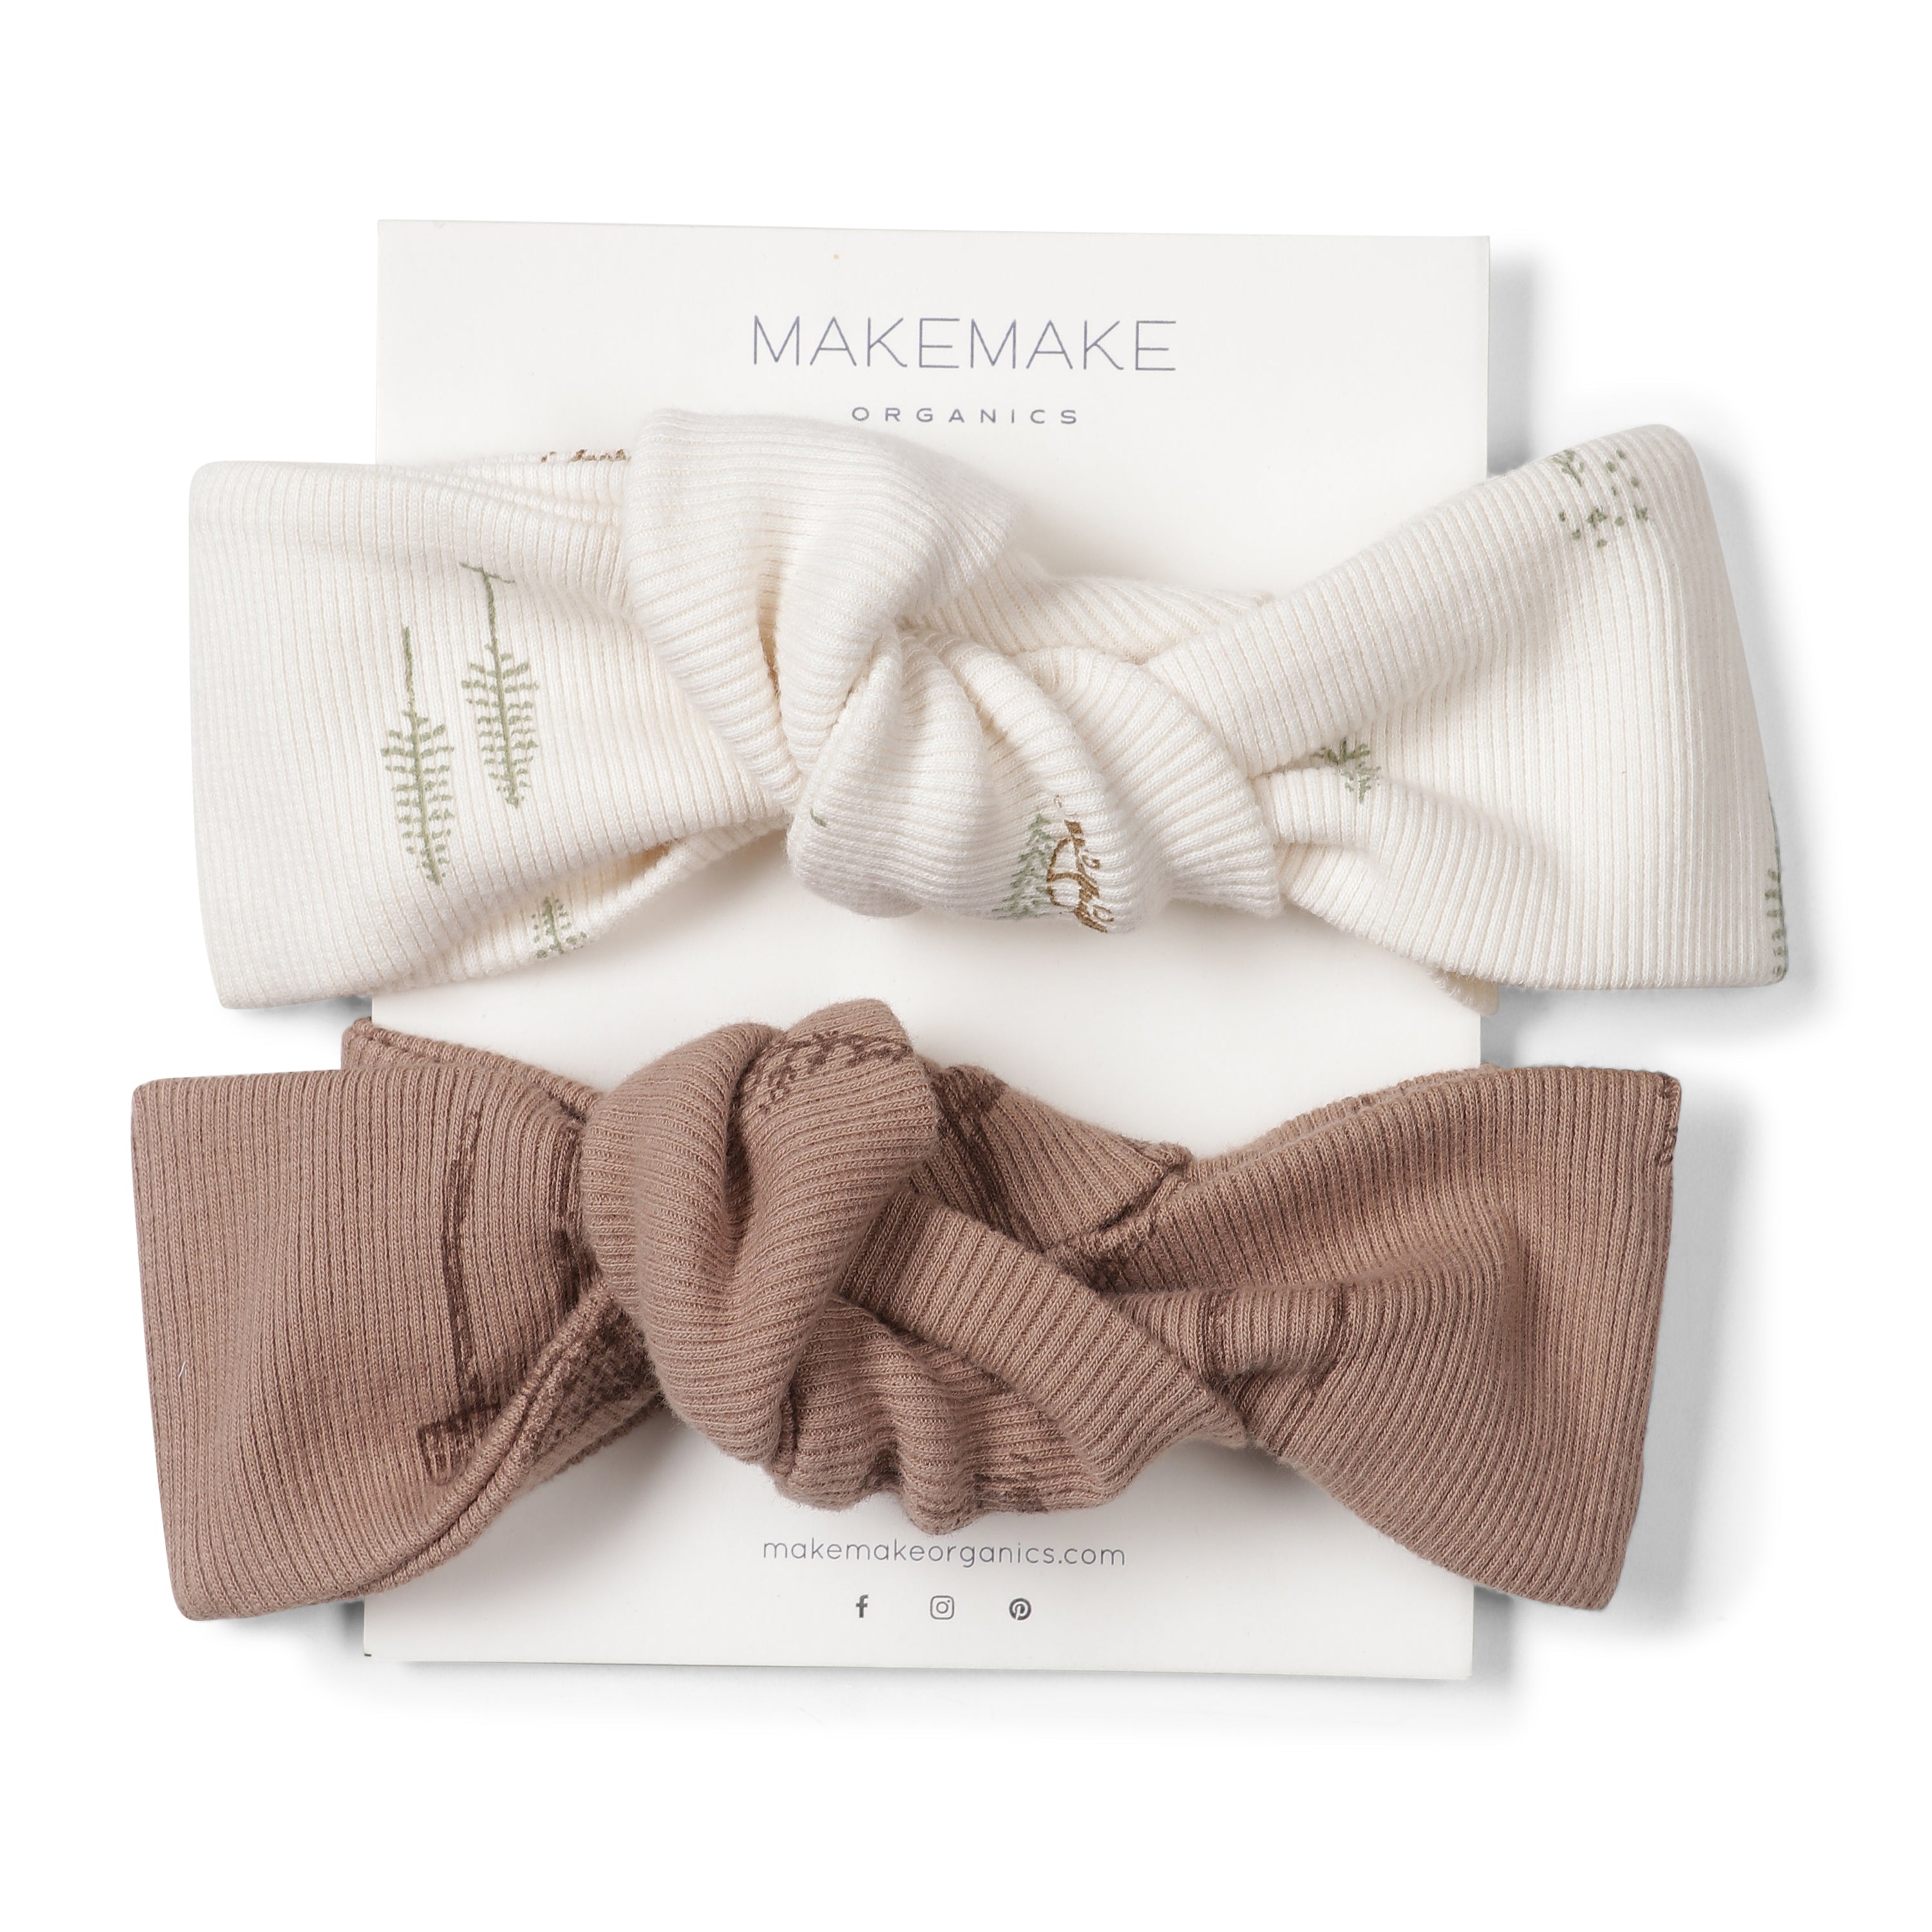 Two Organic Headwraps in Wildwood and Evergreen Fir colors, decorated with subtle embroidery, displayed atop a Makemake Organics branded card on a white background.